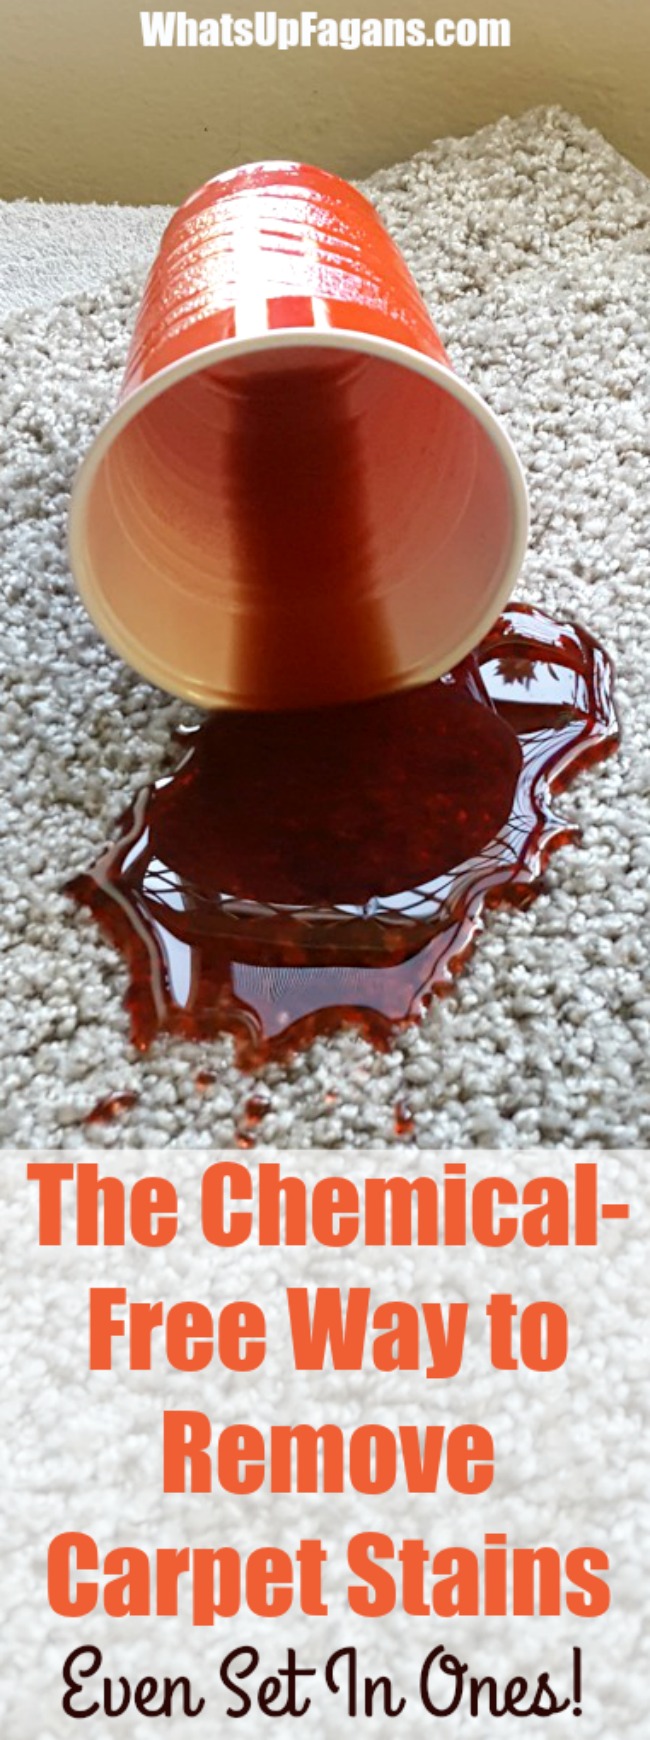 Spot Cleaner | Carpet Stain Removal | DIY Carpet stain remover | chemical-free natural stain remover | cleaning tip hack tutorial | red Kool-Aid spill stain | Coffee stain | Rug Stain | Grape Juice Stains 